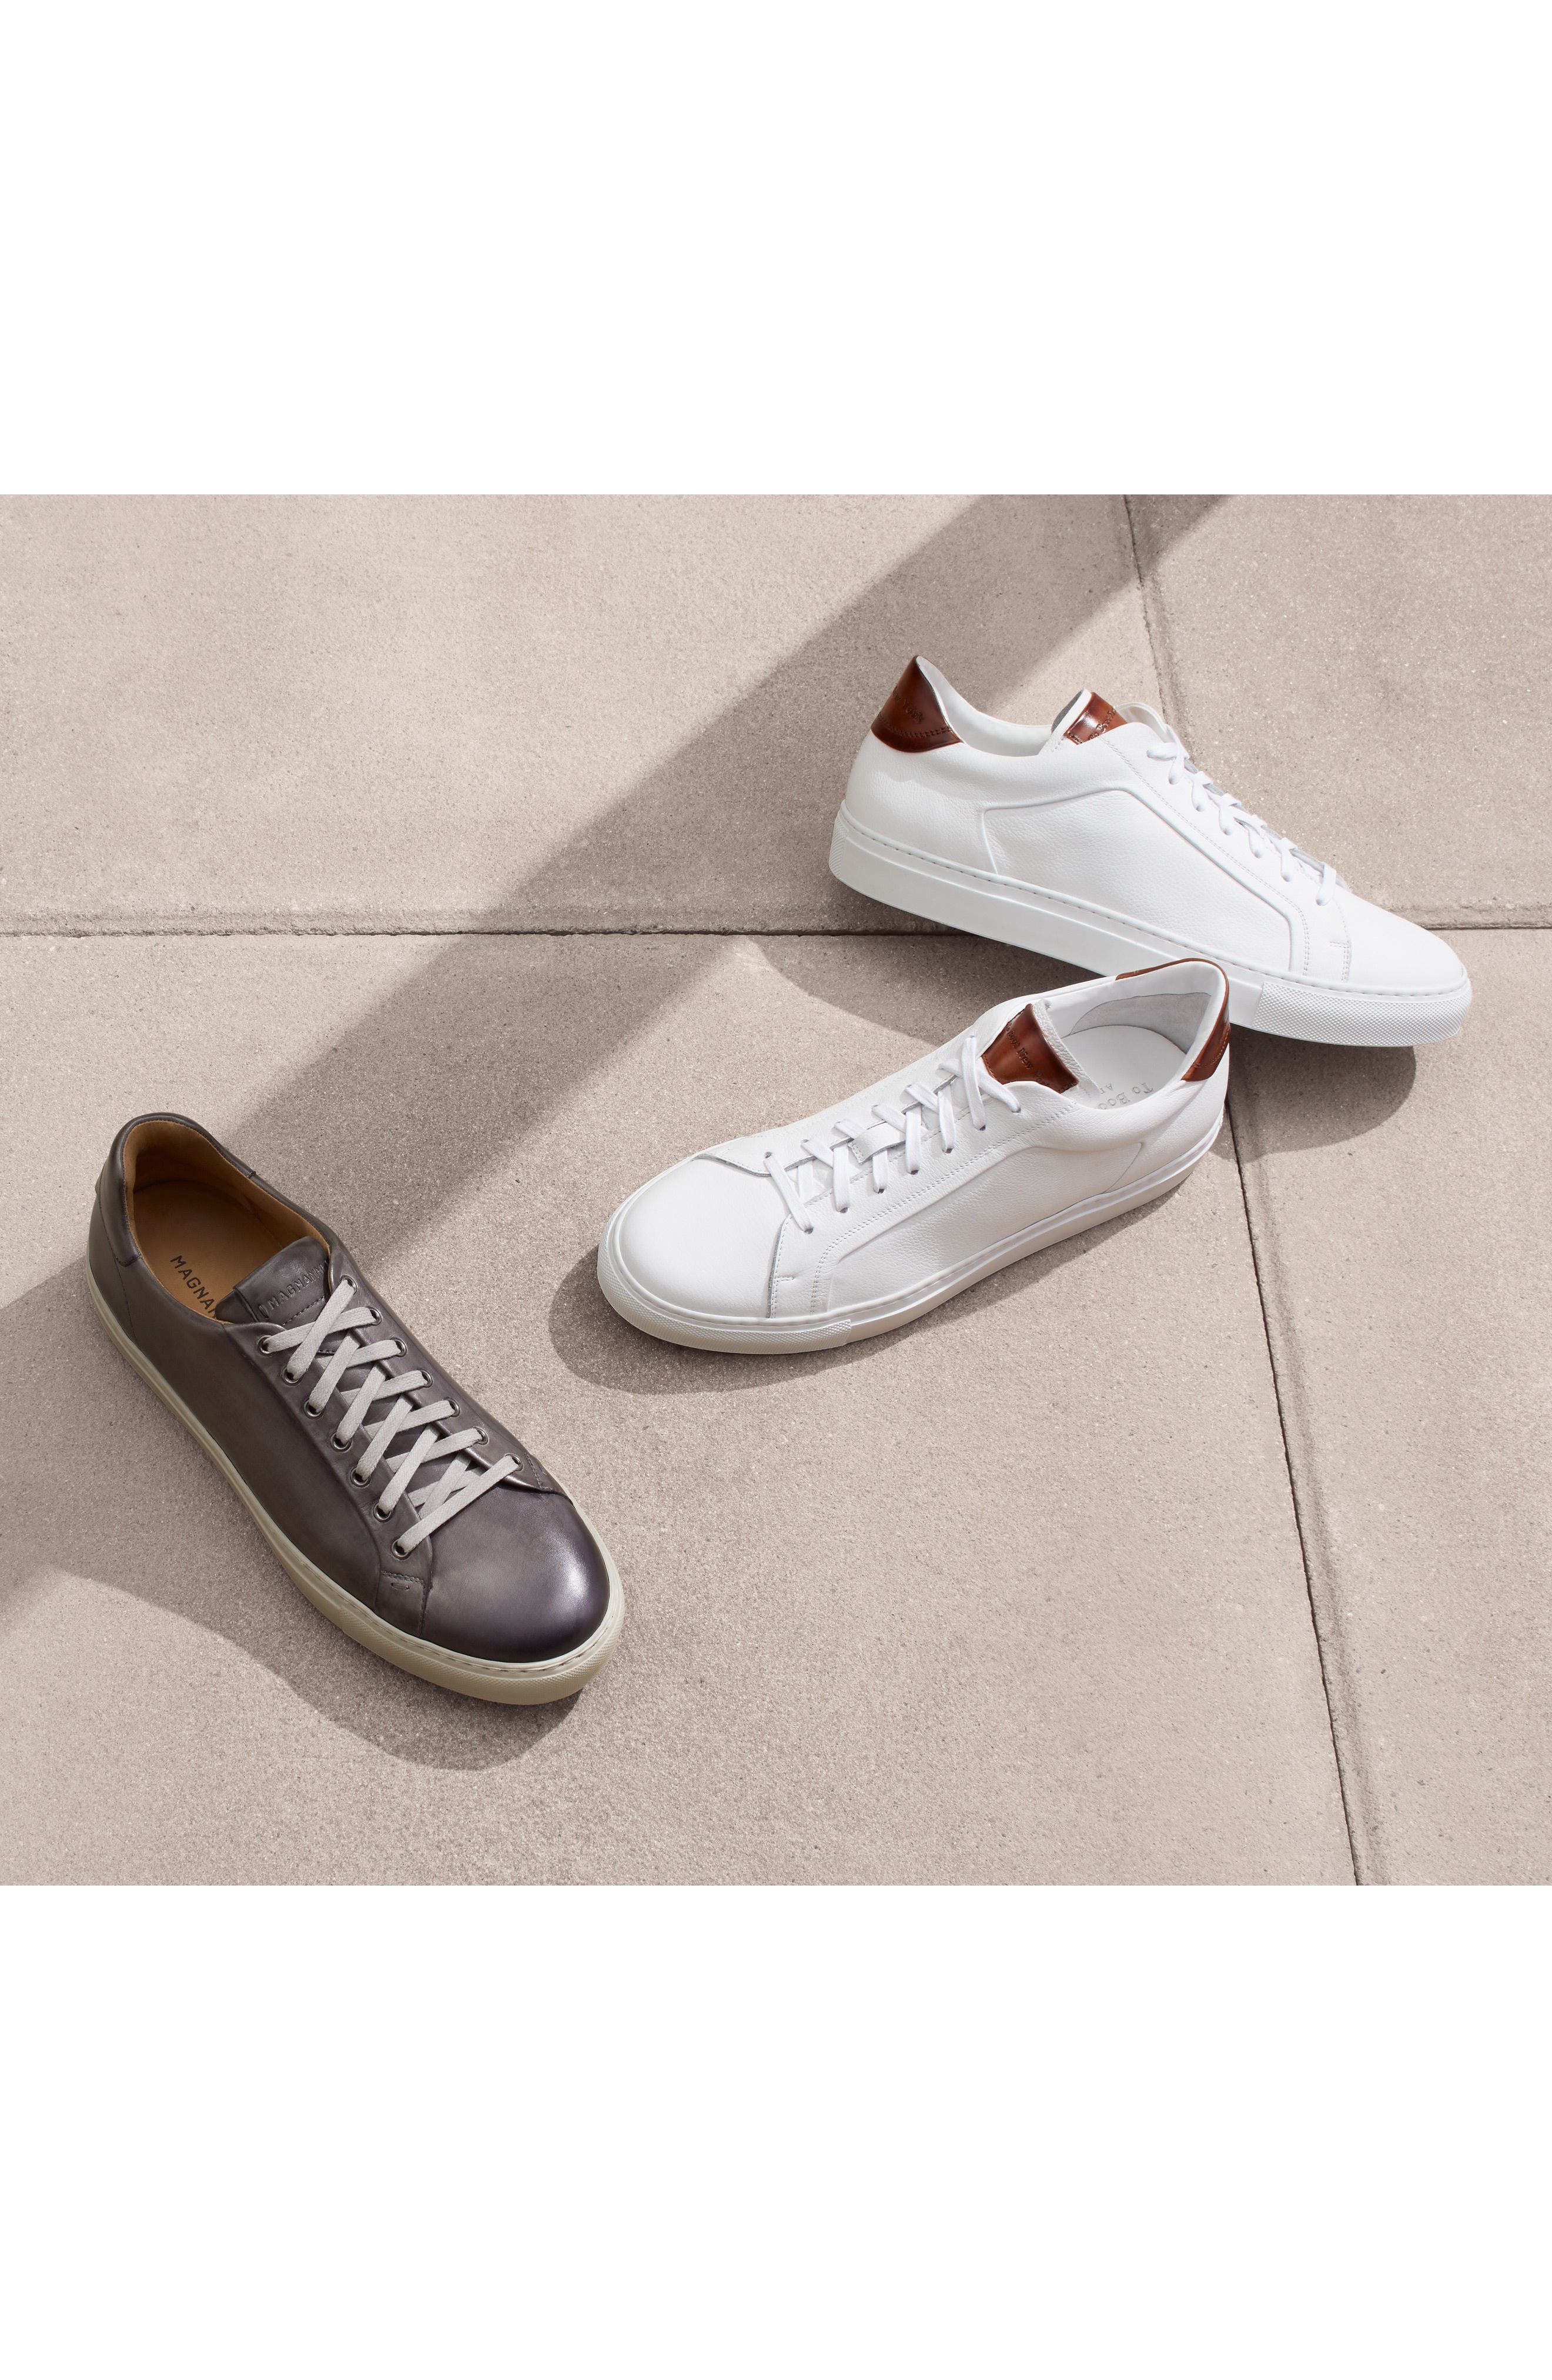 magnanni elonso low top sneaker